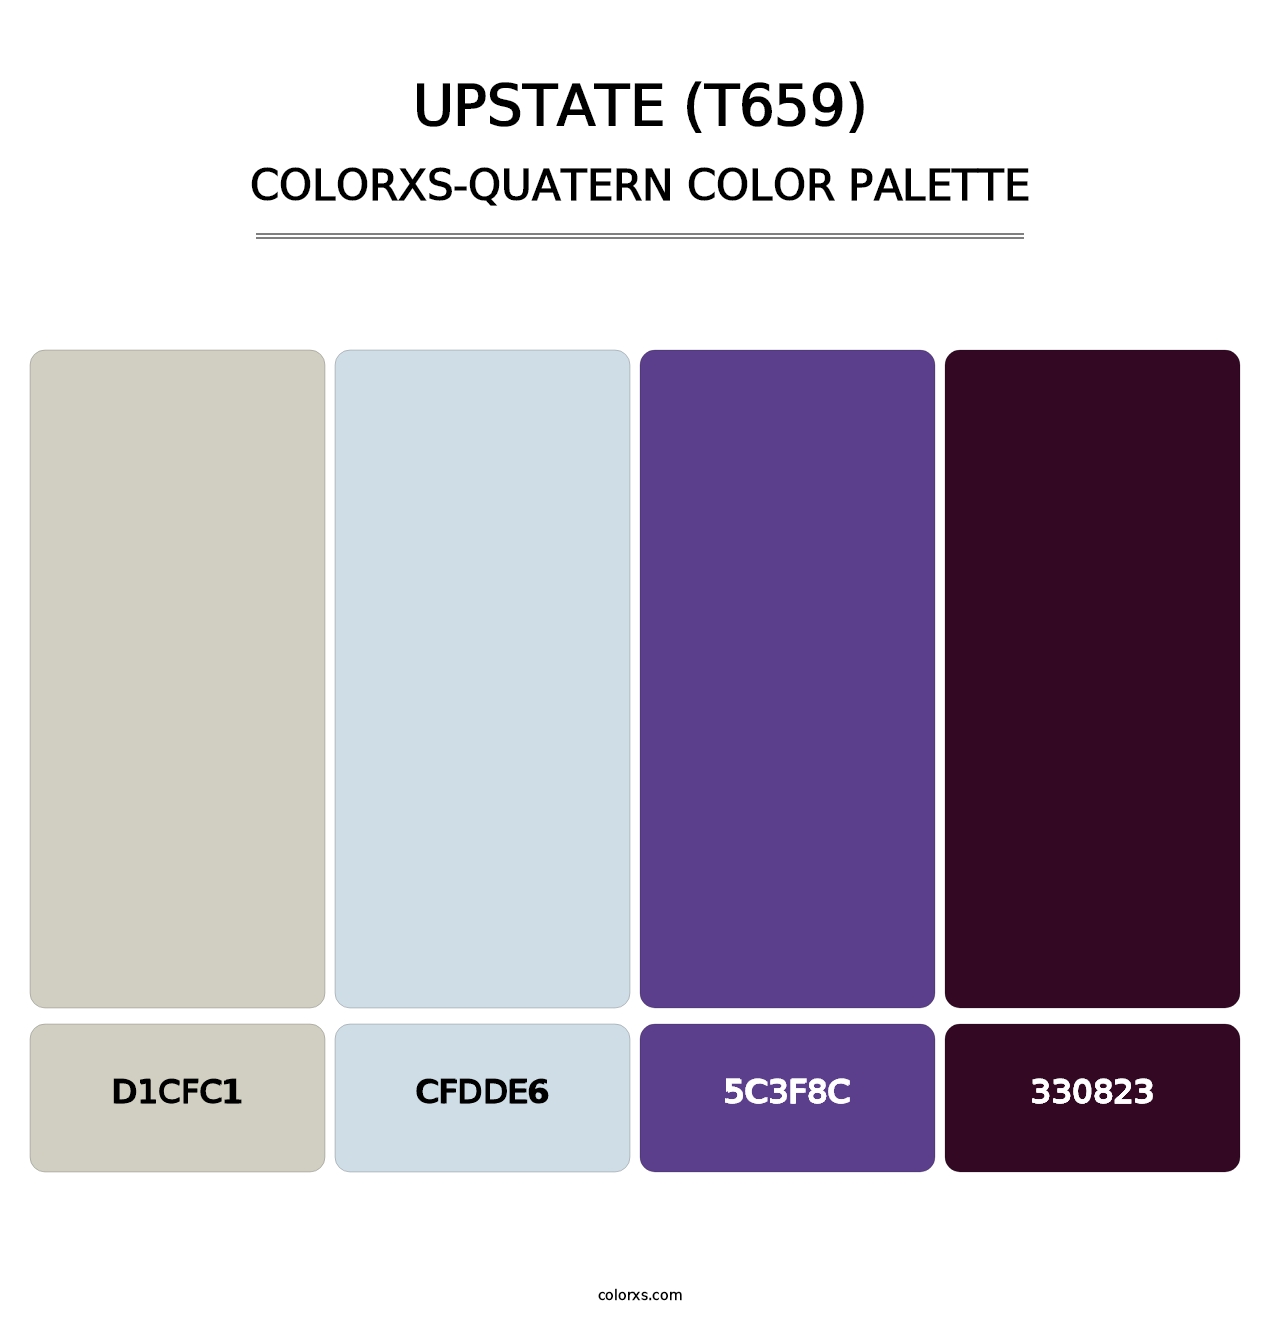 Upstate (T659) - Colorxs Quatern Palette